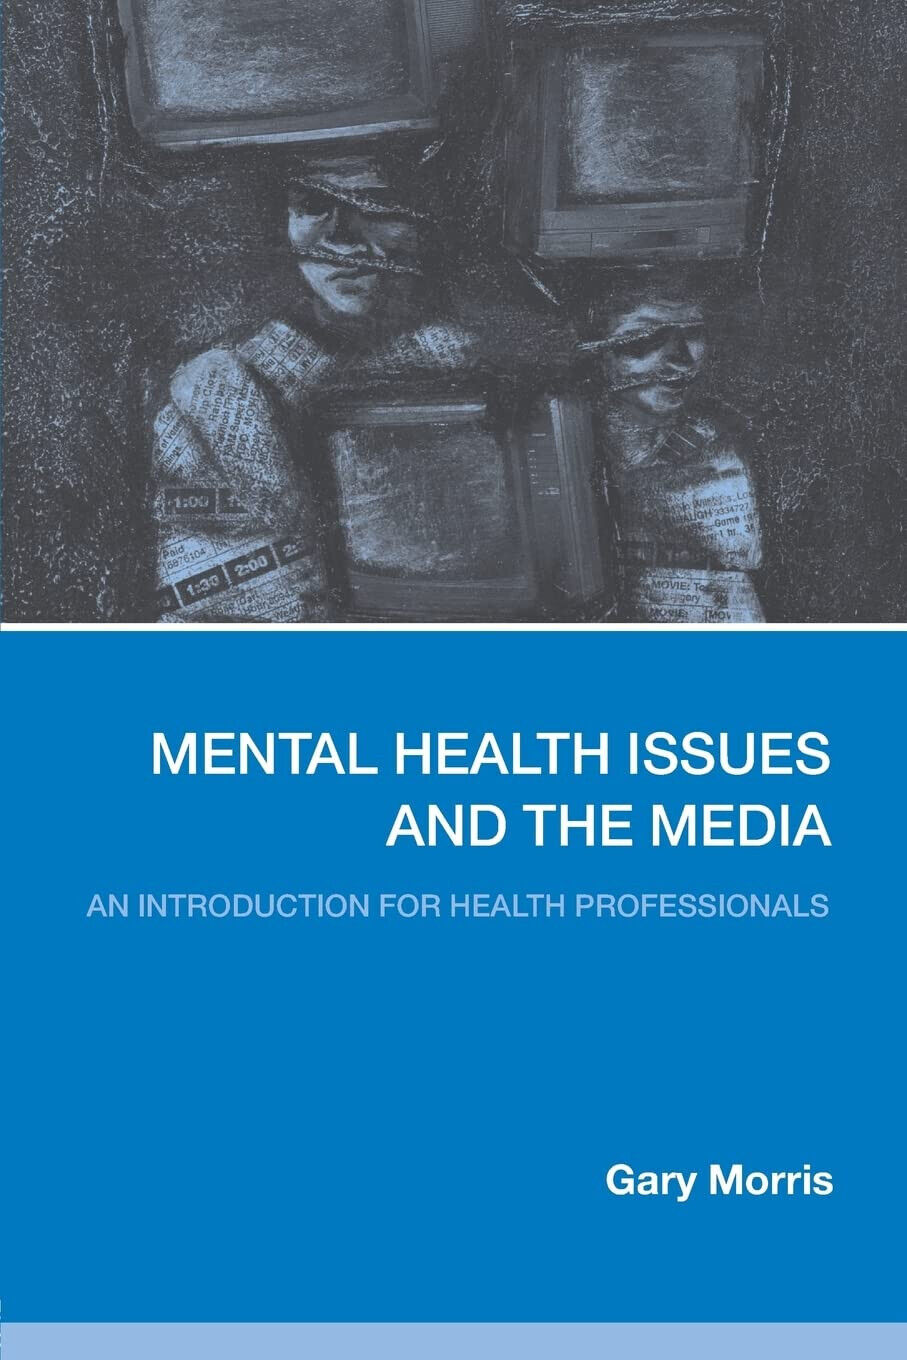 Mental Health Issues and the Media - Gary Morris - Routledge, 2006 libro usato